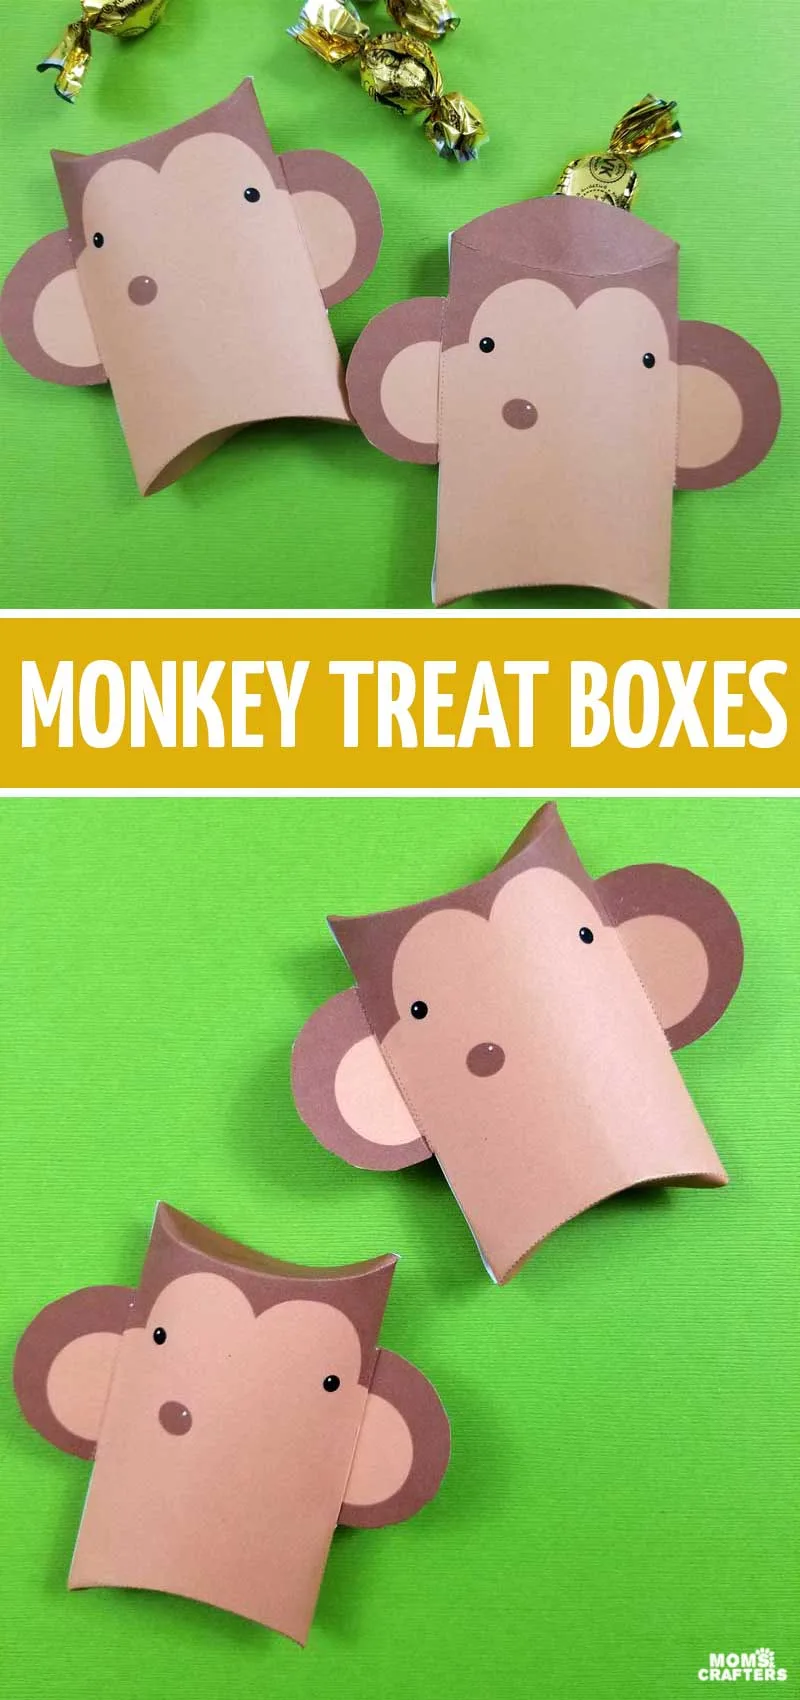 Click to download these monkey party favor boxes - fun paper pillow boxes to use as treat boxes at a monkey birthday party! These fun monkey goody bag ideas are so adorable!